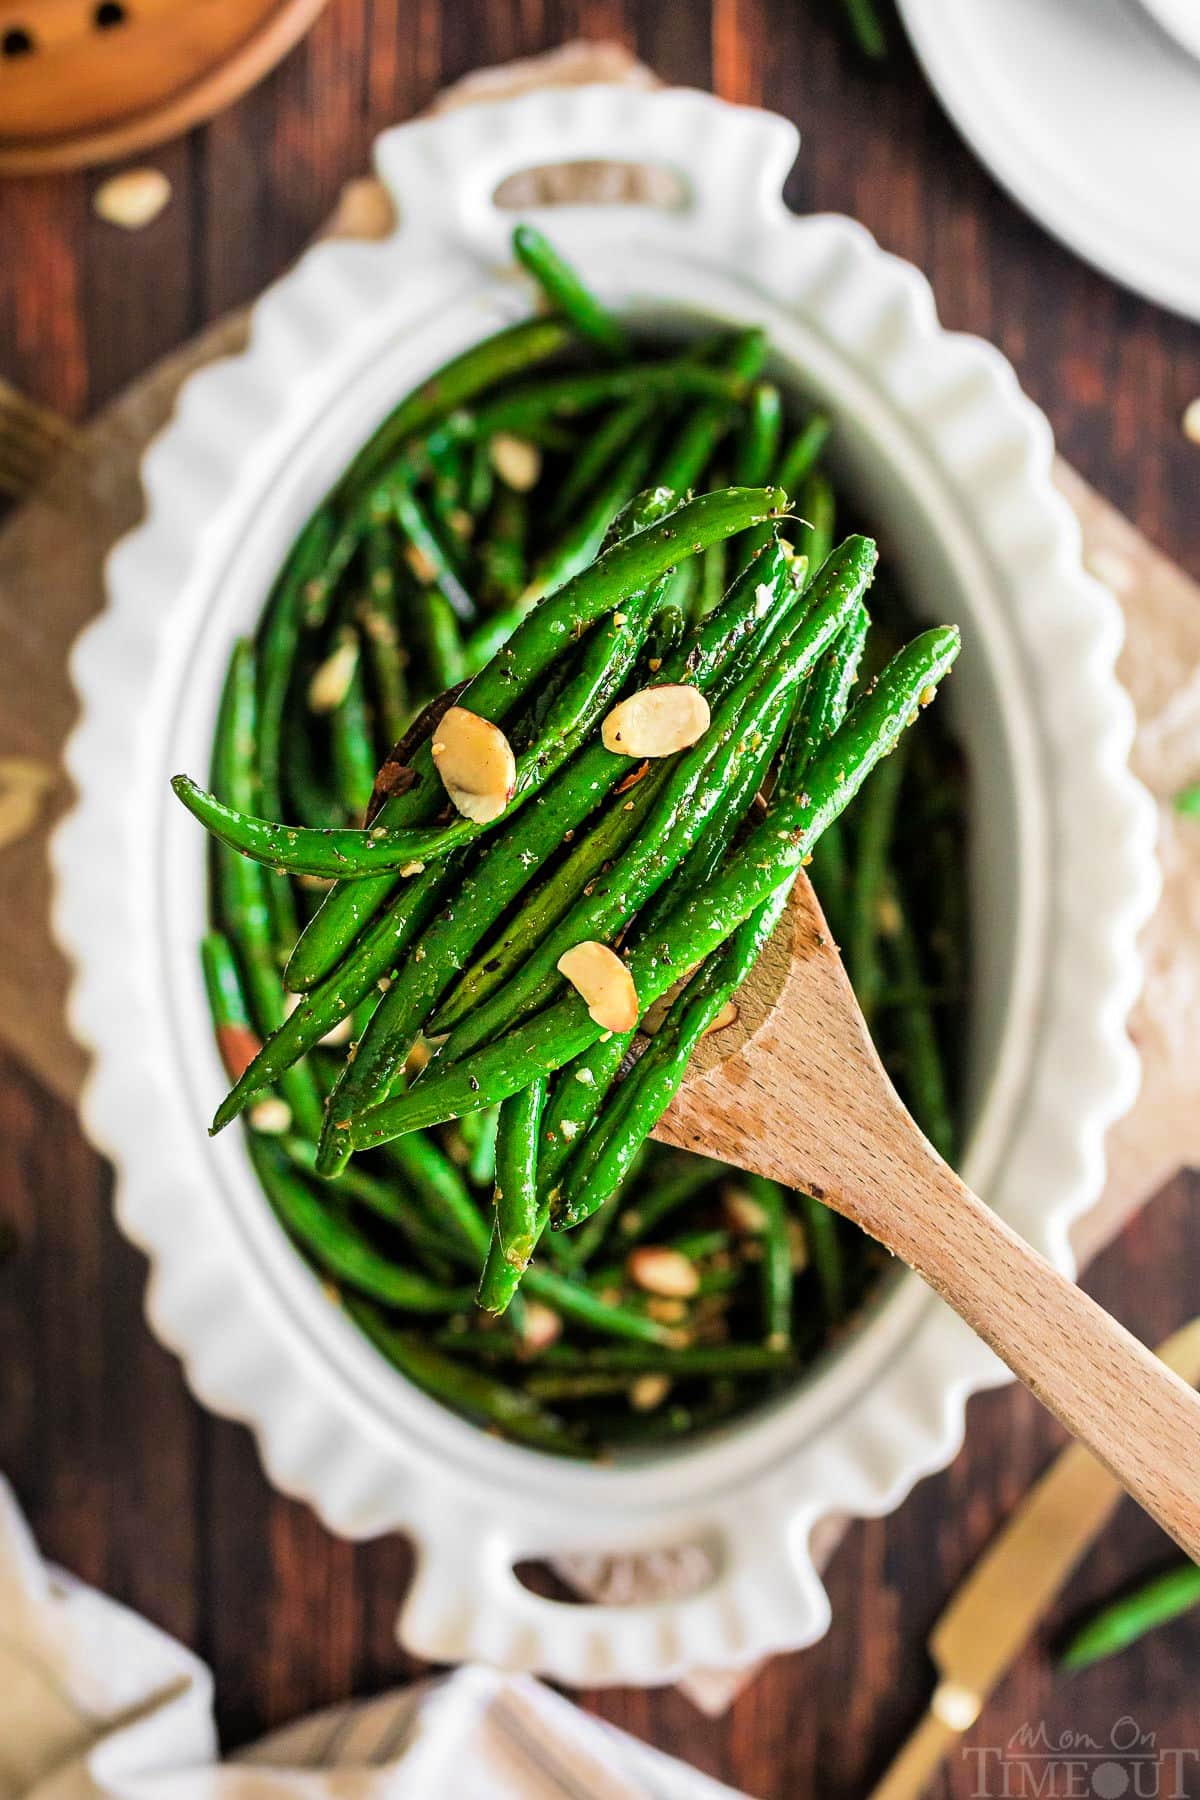 wooden spoon lifting out a serving of garlic green beans out of an oval white serving dish.